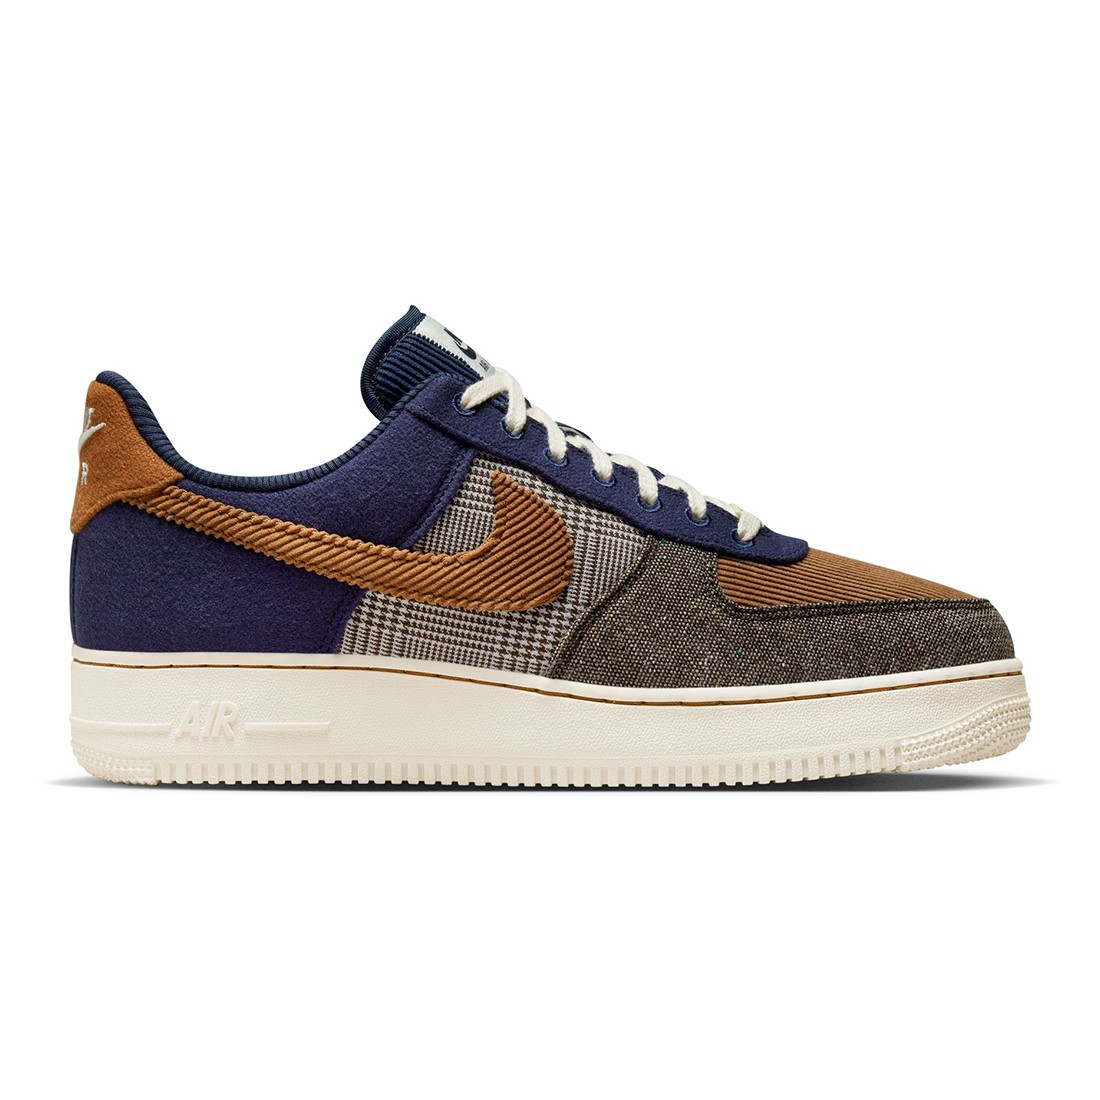 nike BLUE Men Air Force 1 '07 Prm (midnight navy / ale brown-pale ivory)